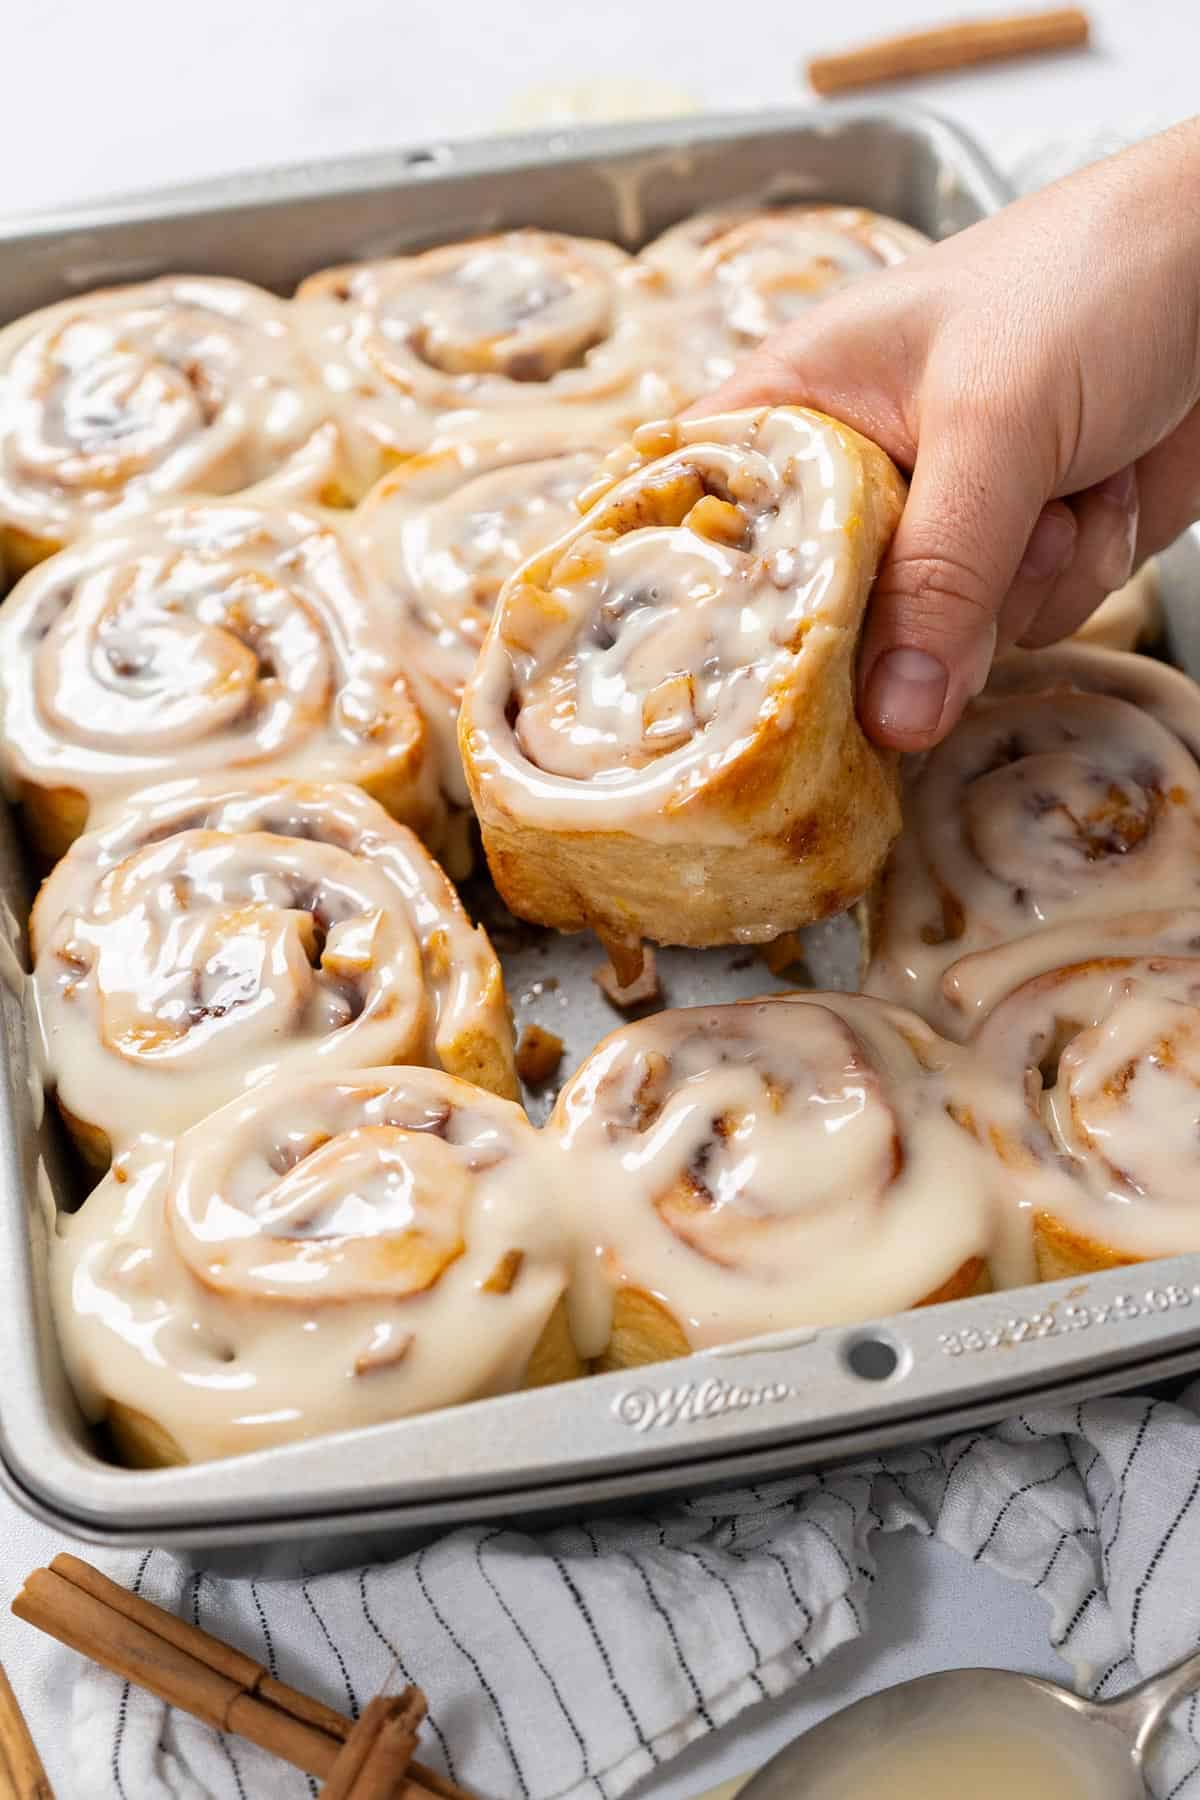 Taking out one apple cinnamon roll from the tray.